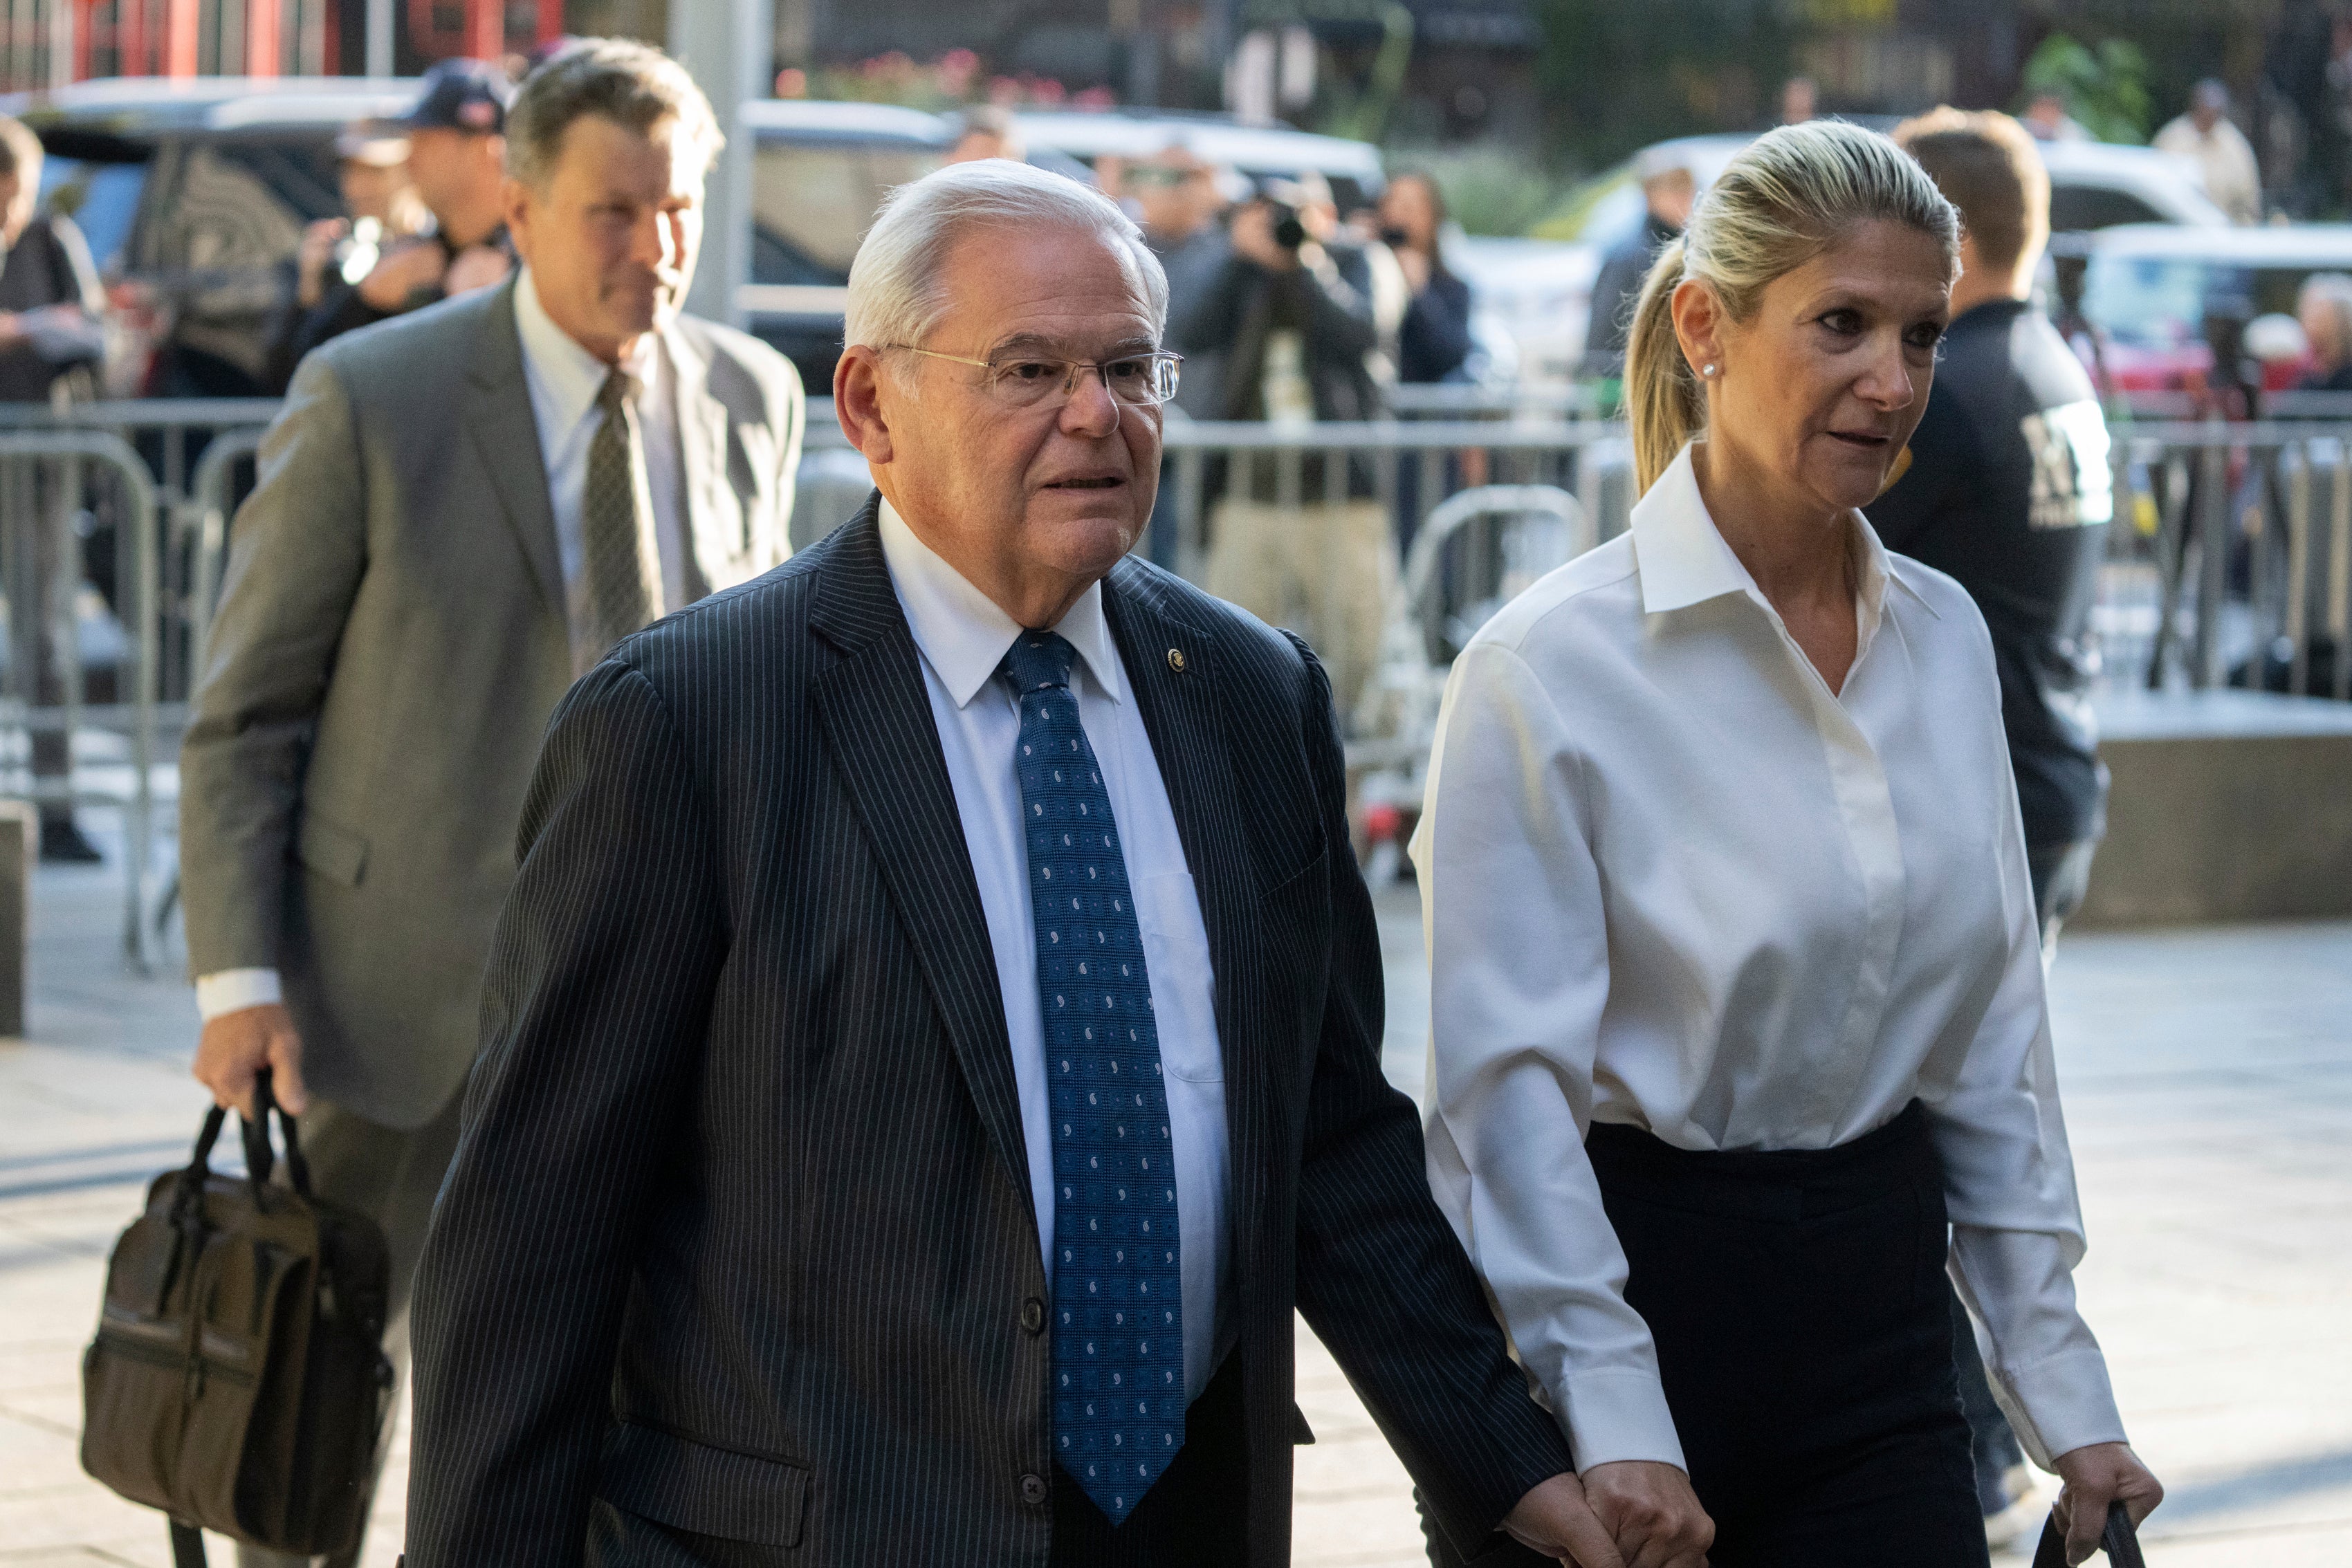 Democratic Senator Bob Menendez of New Jersey and his wife, Nadine Menendez, arrive at the federal courthouse in New York in September 2023 after being charged with bribery